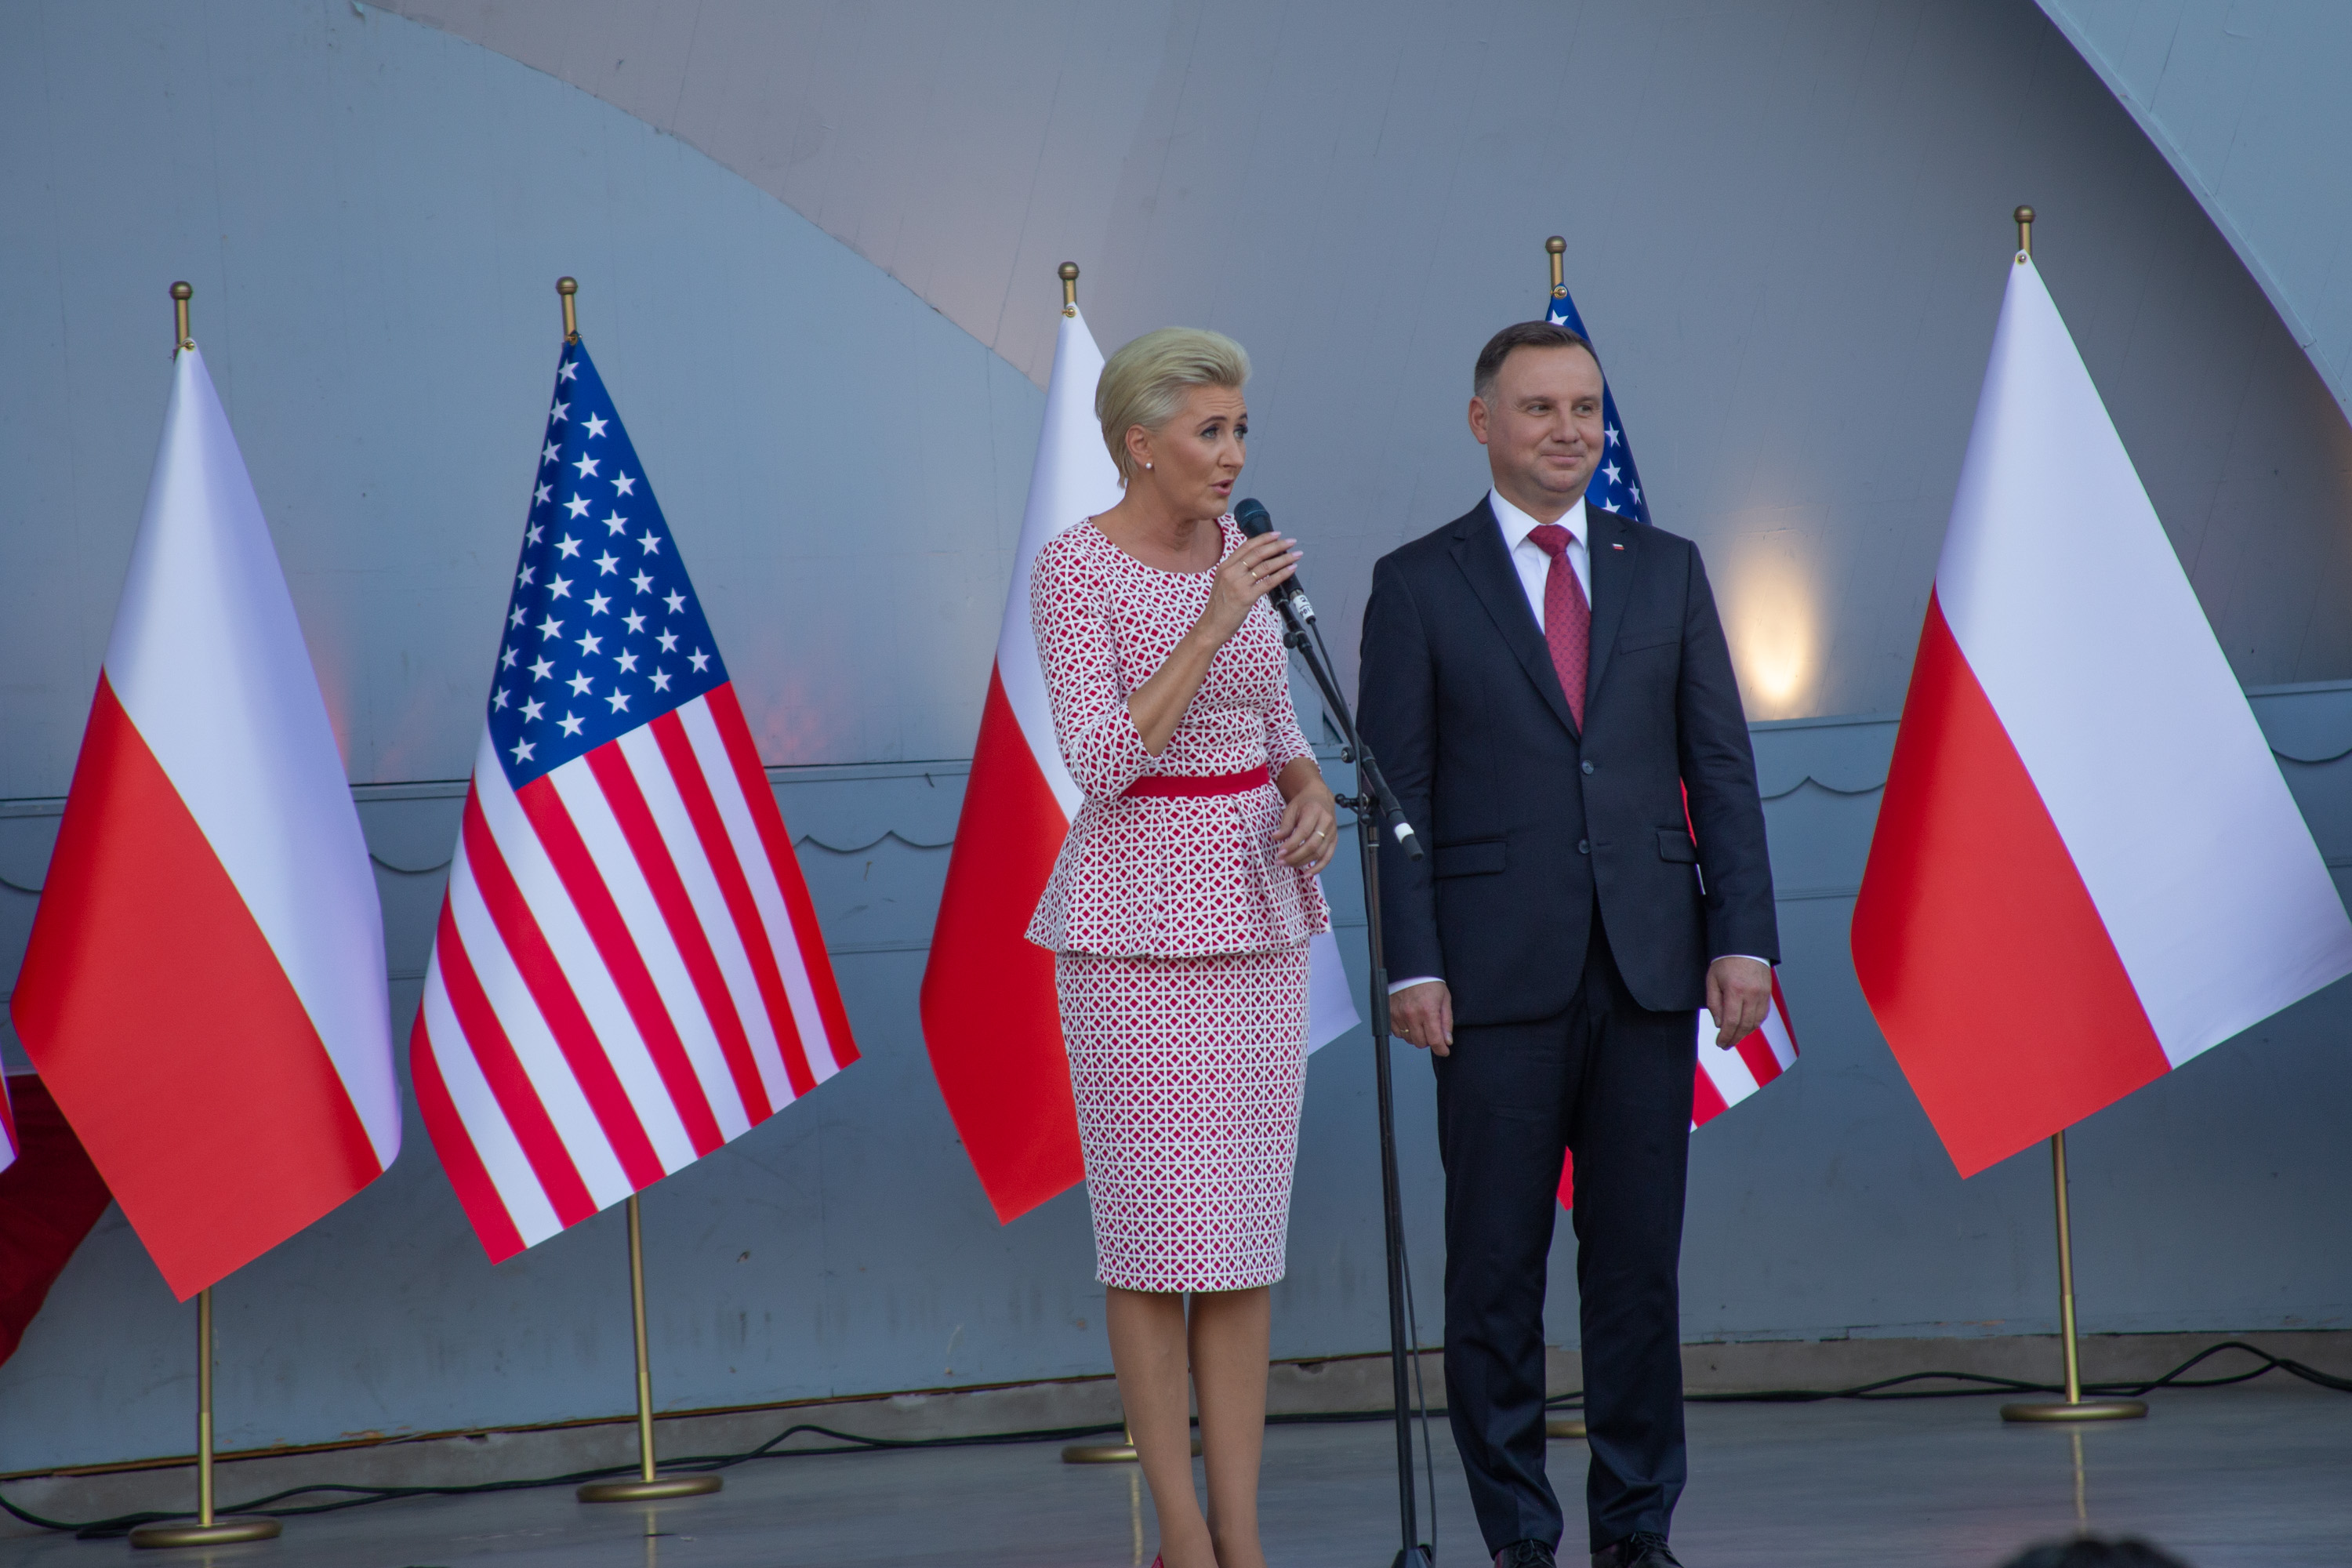 Images From the President Duda Visit